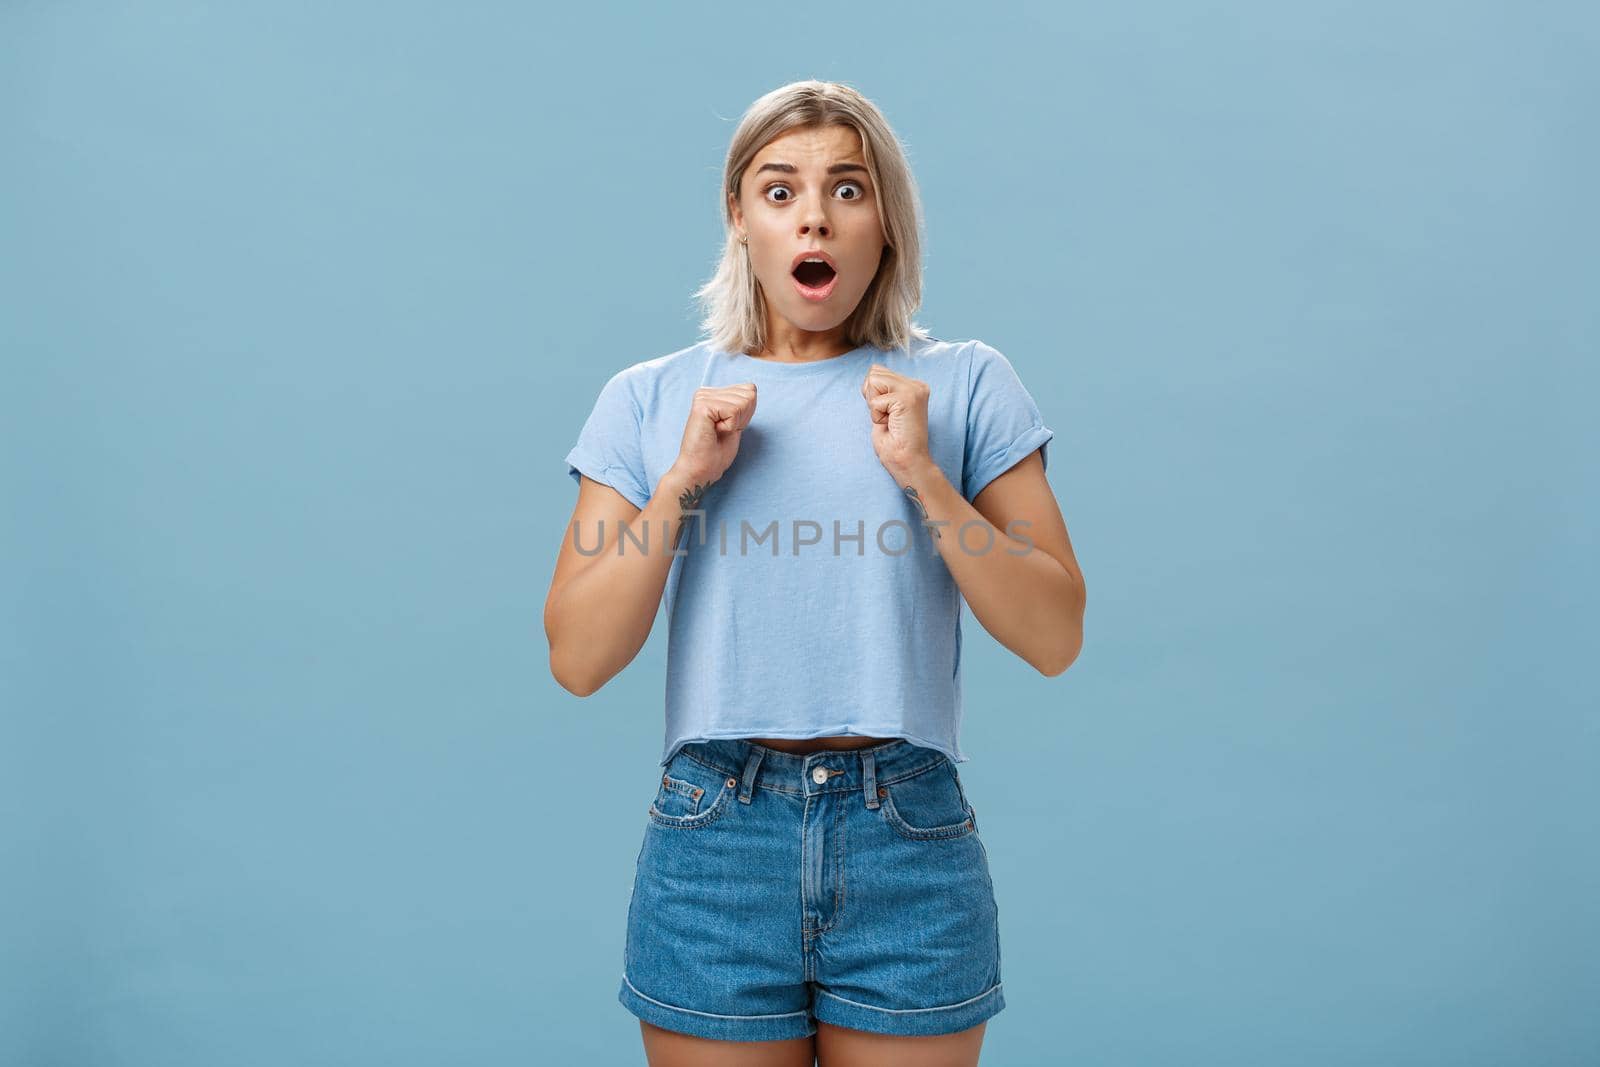 Studio shot of stunned shocked girl standing in stupor with dropped jaw and frightened look clenchign fists near breast from fear standing astonished over blue background. Emotions concept